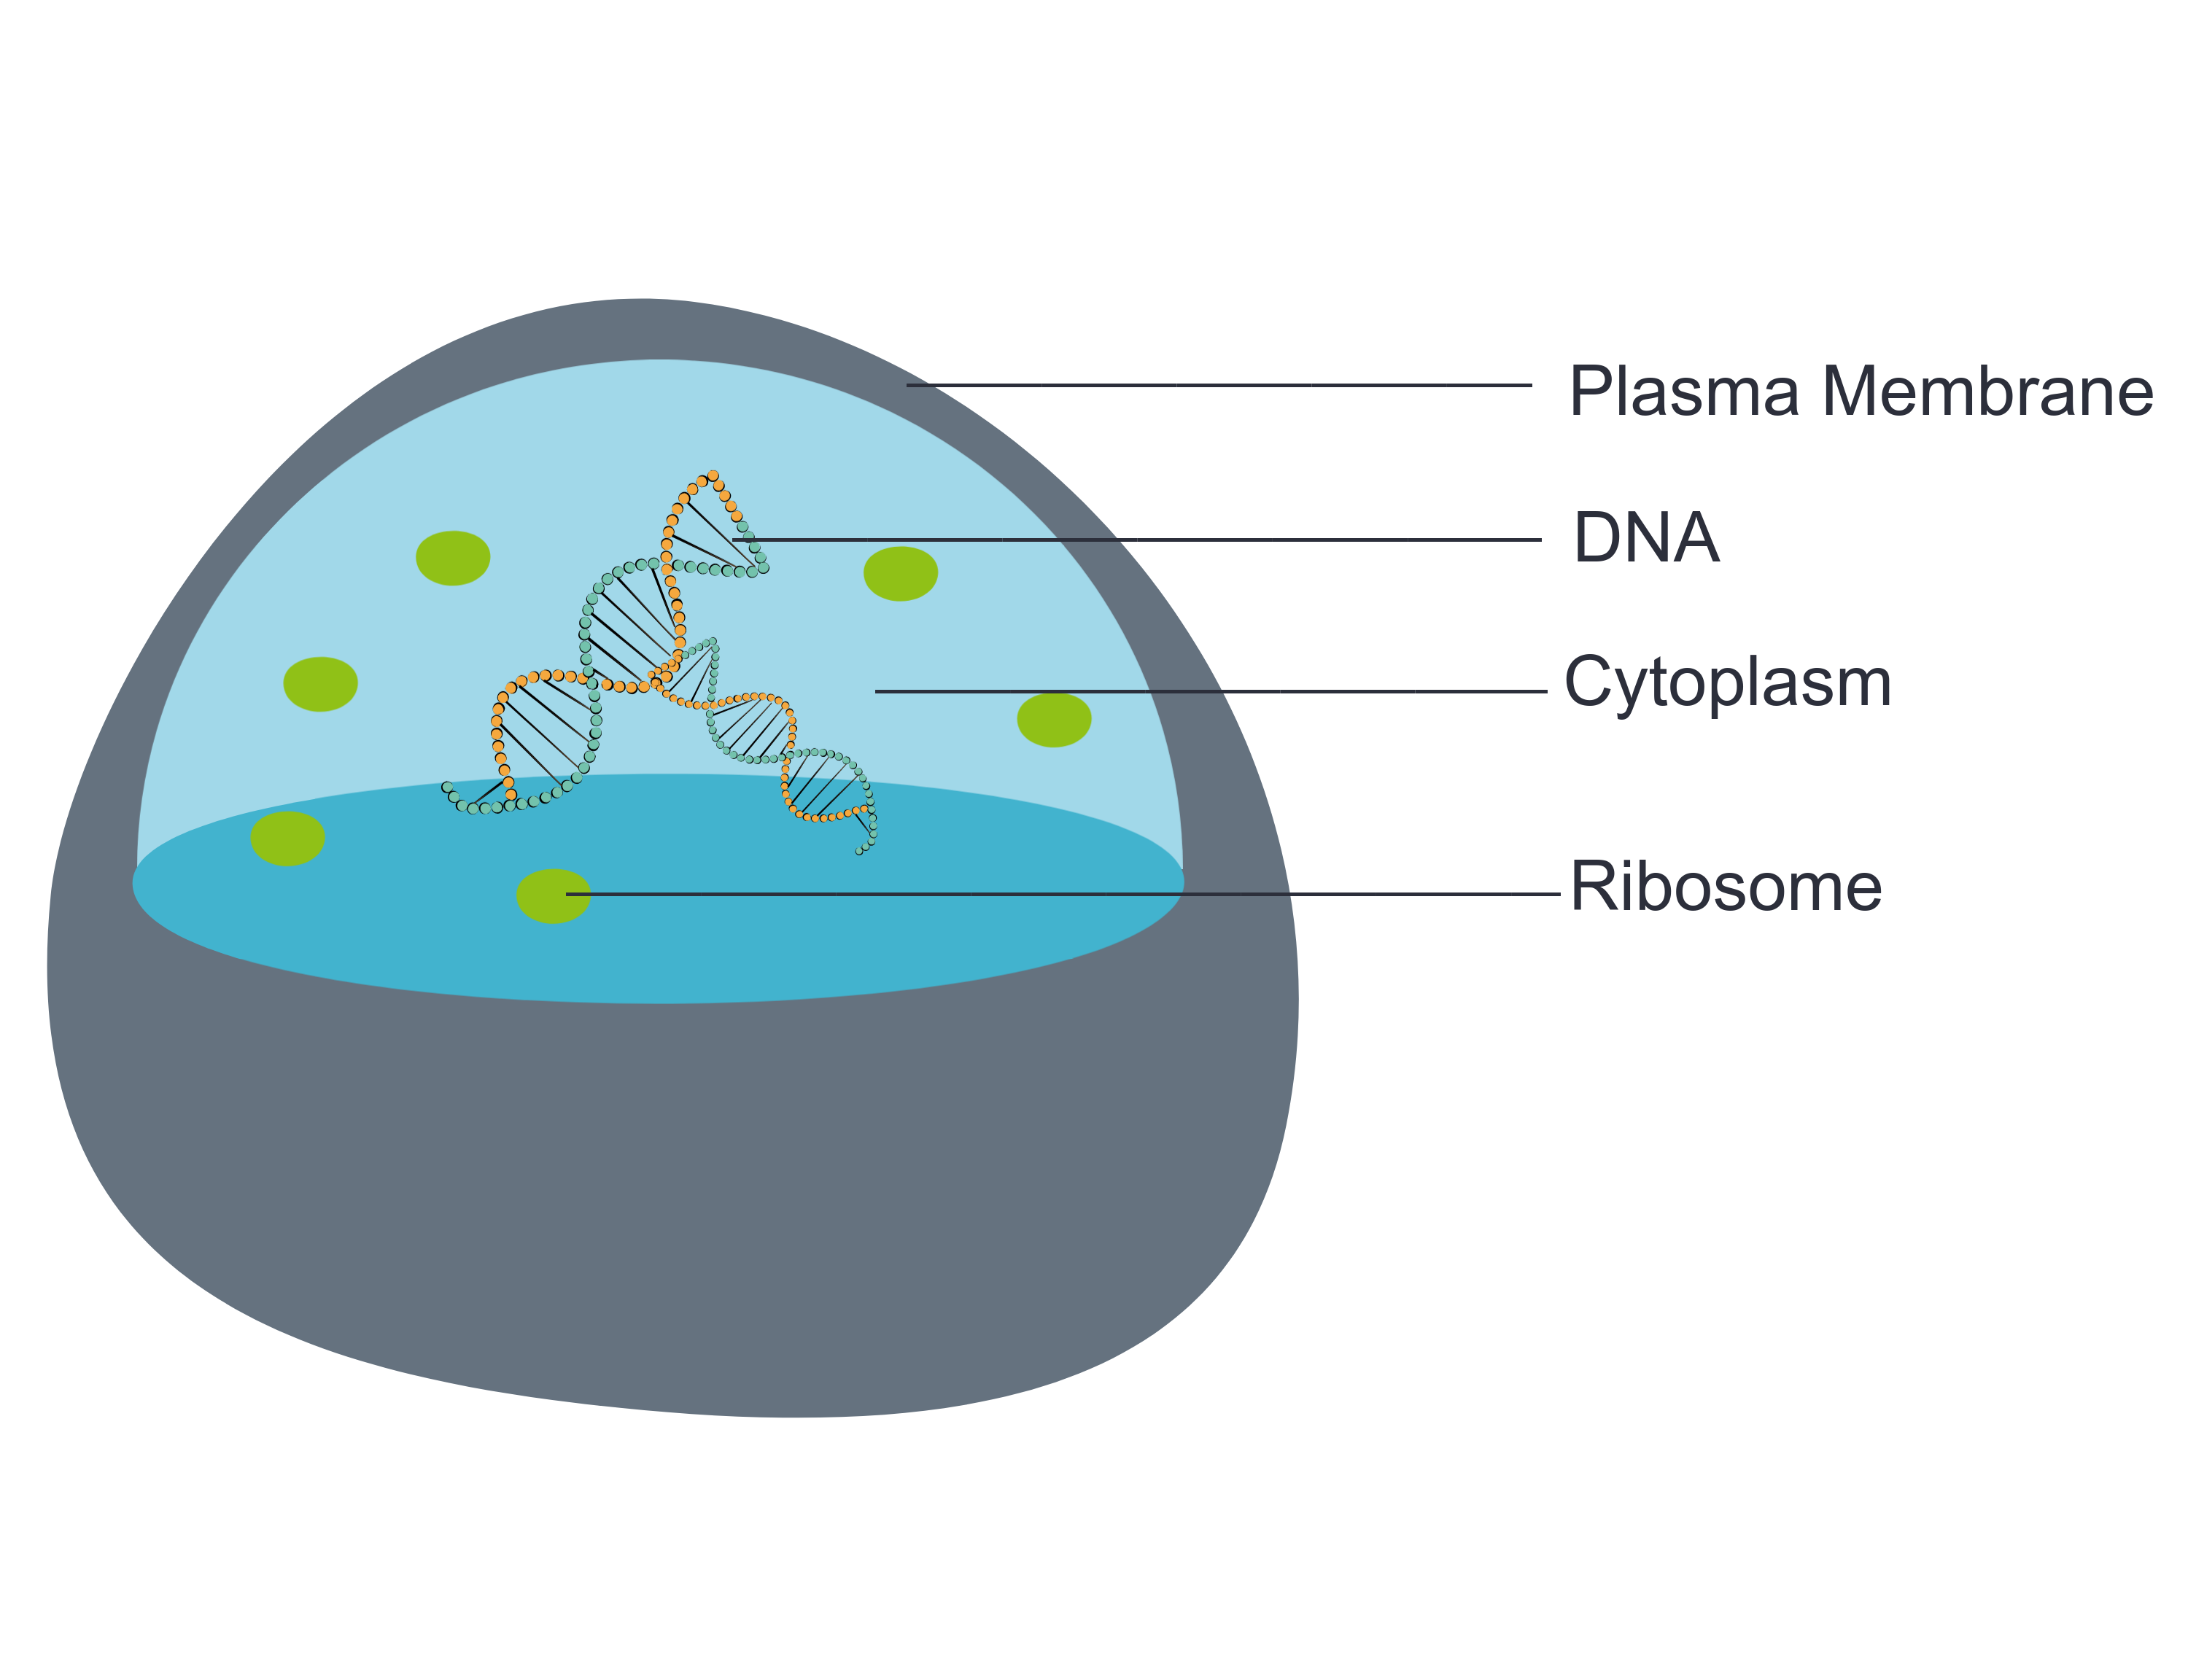 Image shows a diagram of a cell containing the four basic components of a cell: a plasma membrane, DNA, ribosomes and a cytoplasm.